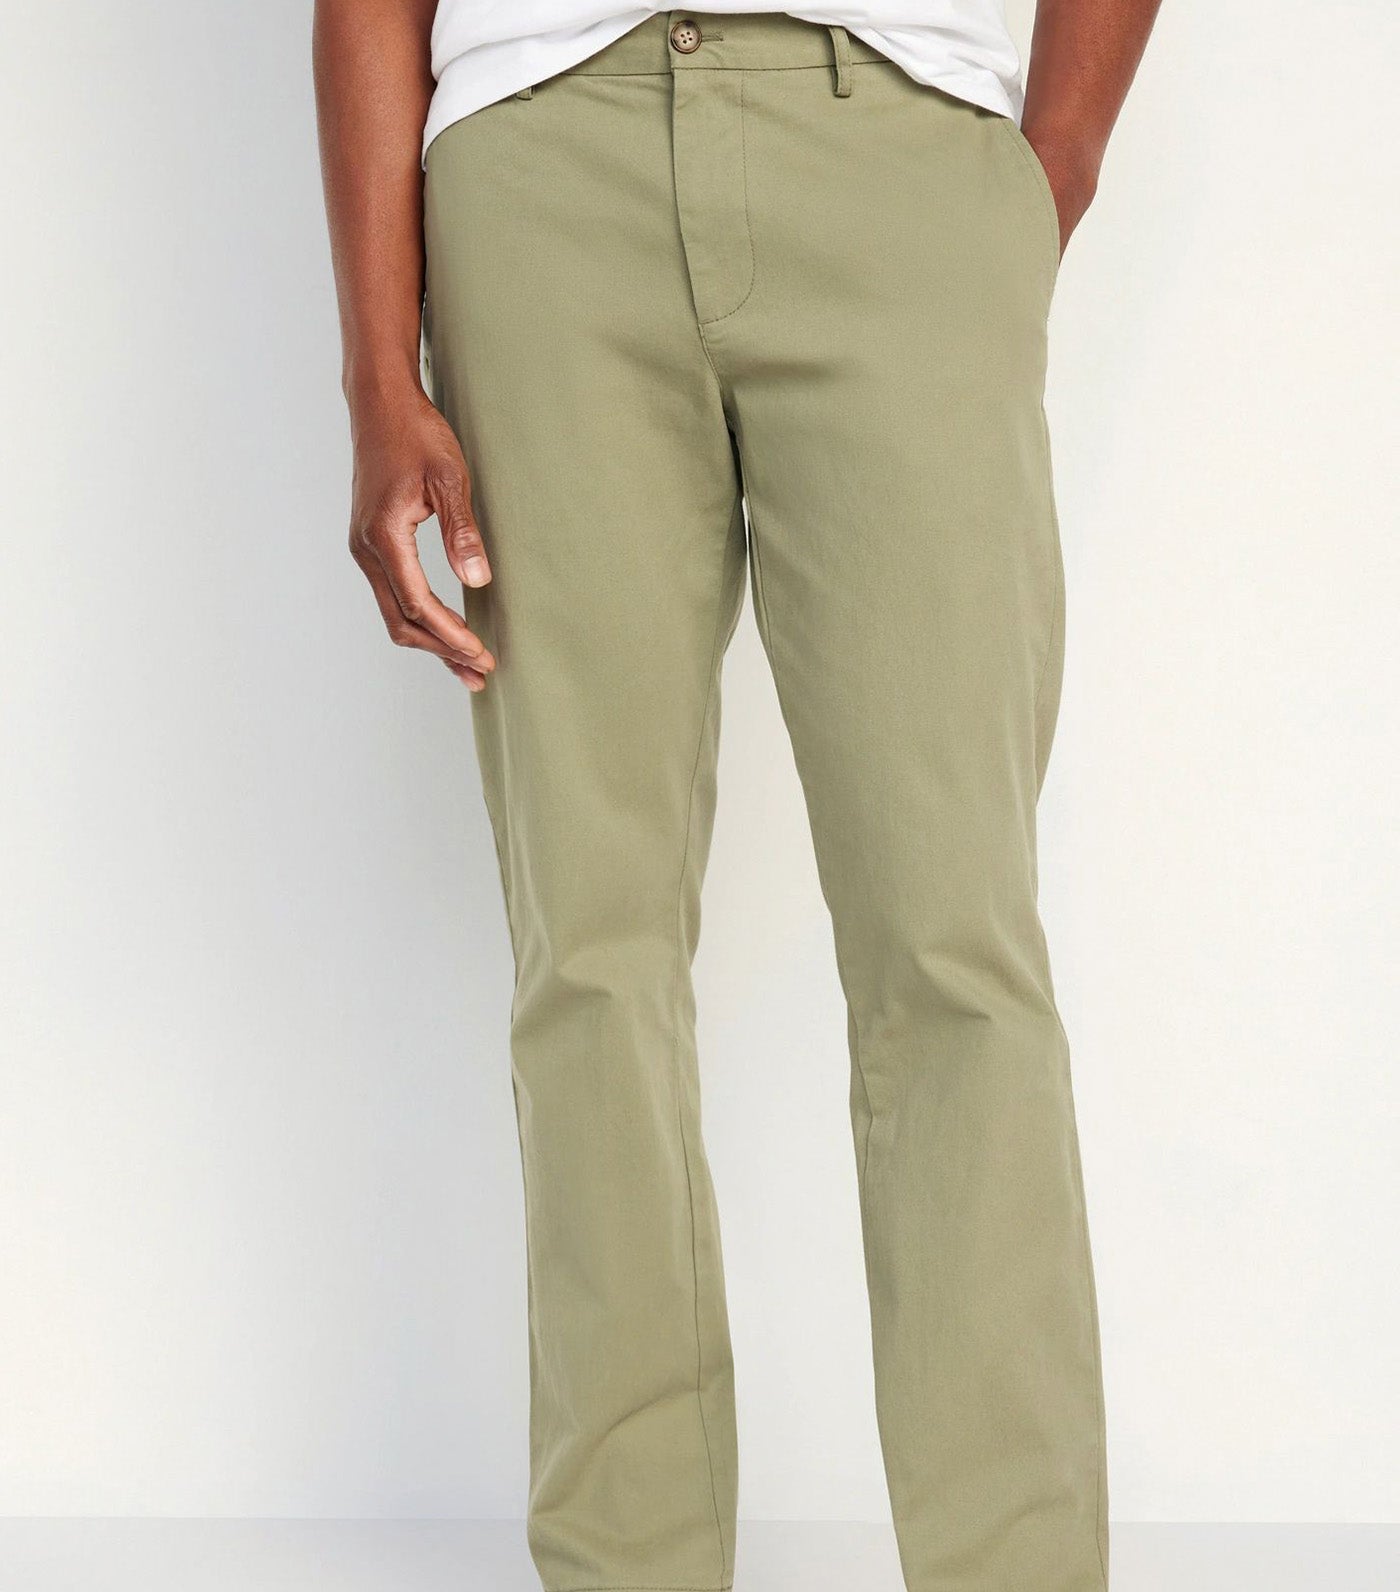 Straight Built-In Flex Rotation Chino Pants for Men Simply Sage